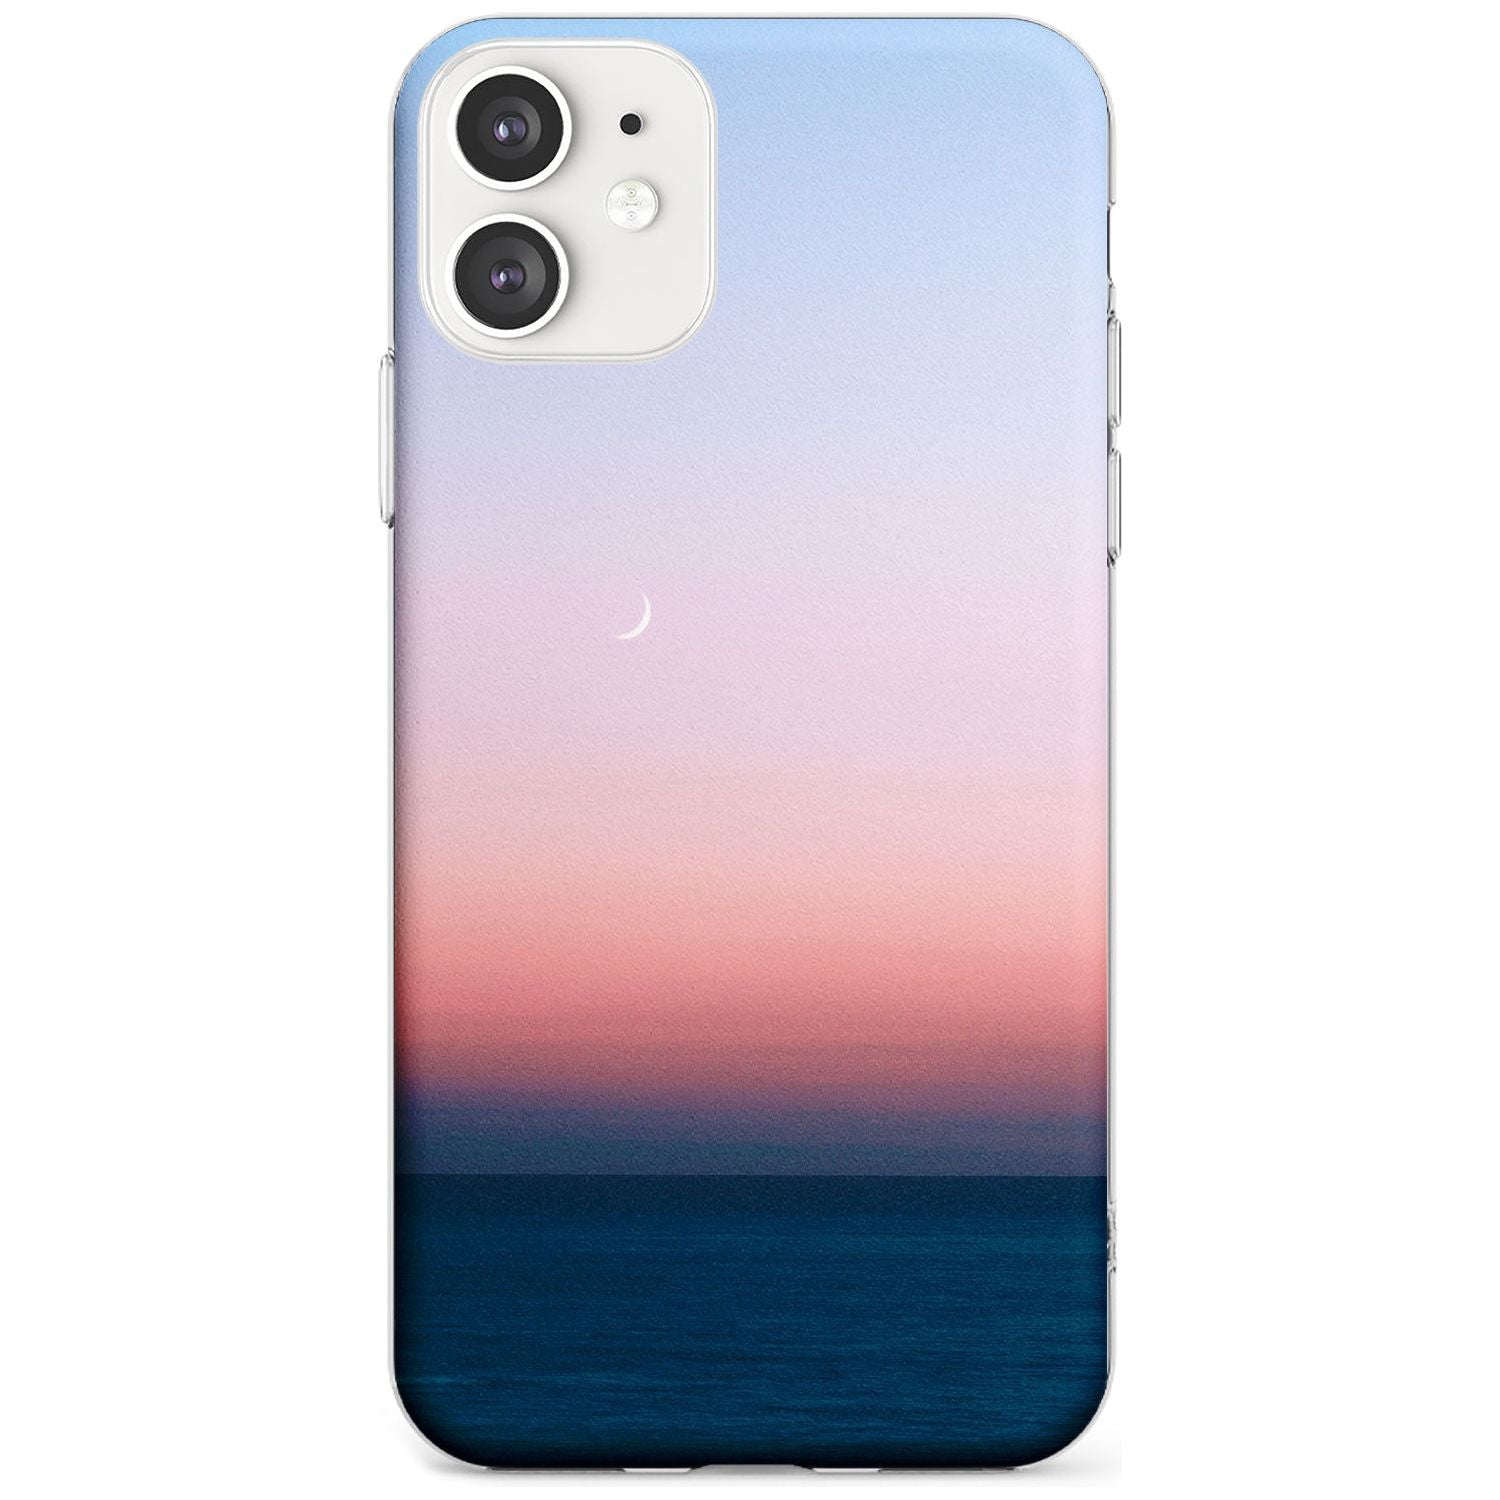 Sunset at Sea Photograph Slim TPU Phone Case for iPhone 11